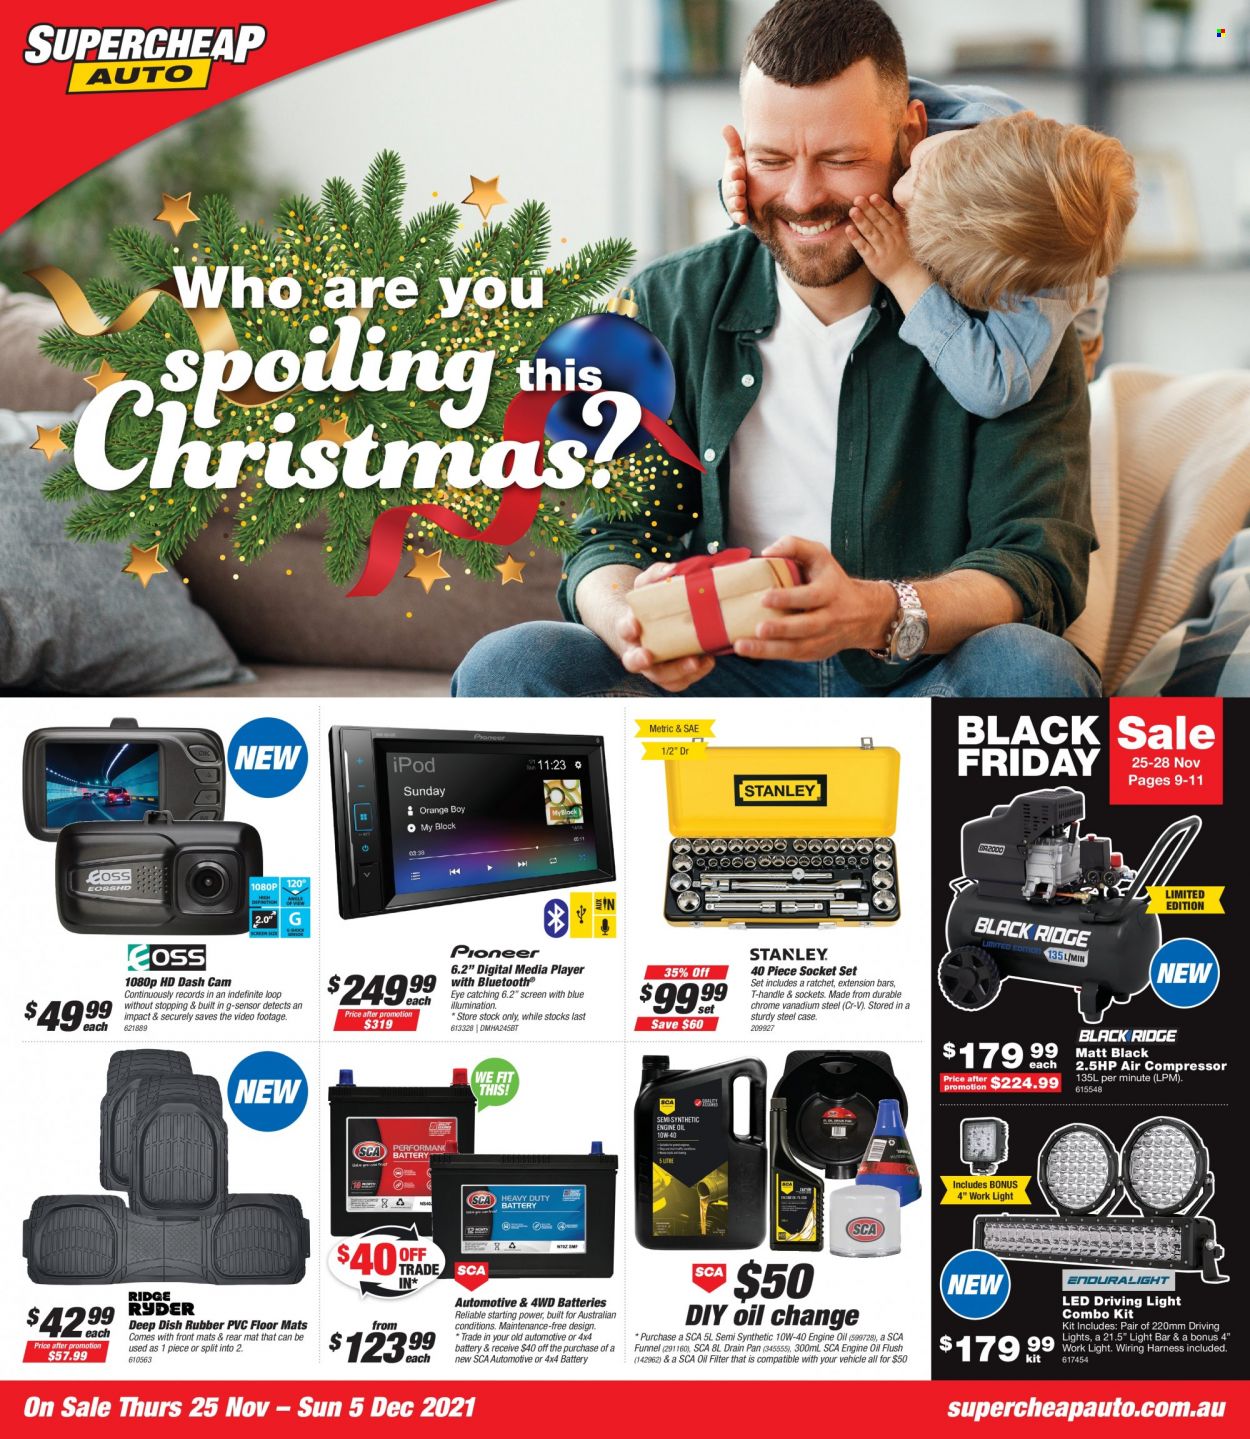 thumbnail - Supercheap Auto Catalogue - 25 Nov 2021 - 5 Dec 2021 - Sales products - dashboard camera, media player, socket set, combo kit, air compressor, work light, oil filter, car battery, automotive batteries, driving lights, wiring harness, motor oil. Page 1.